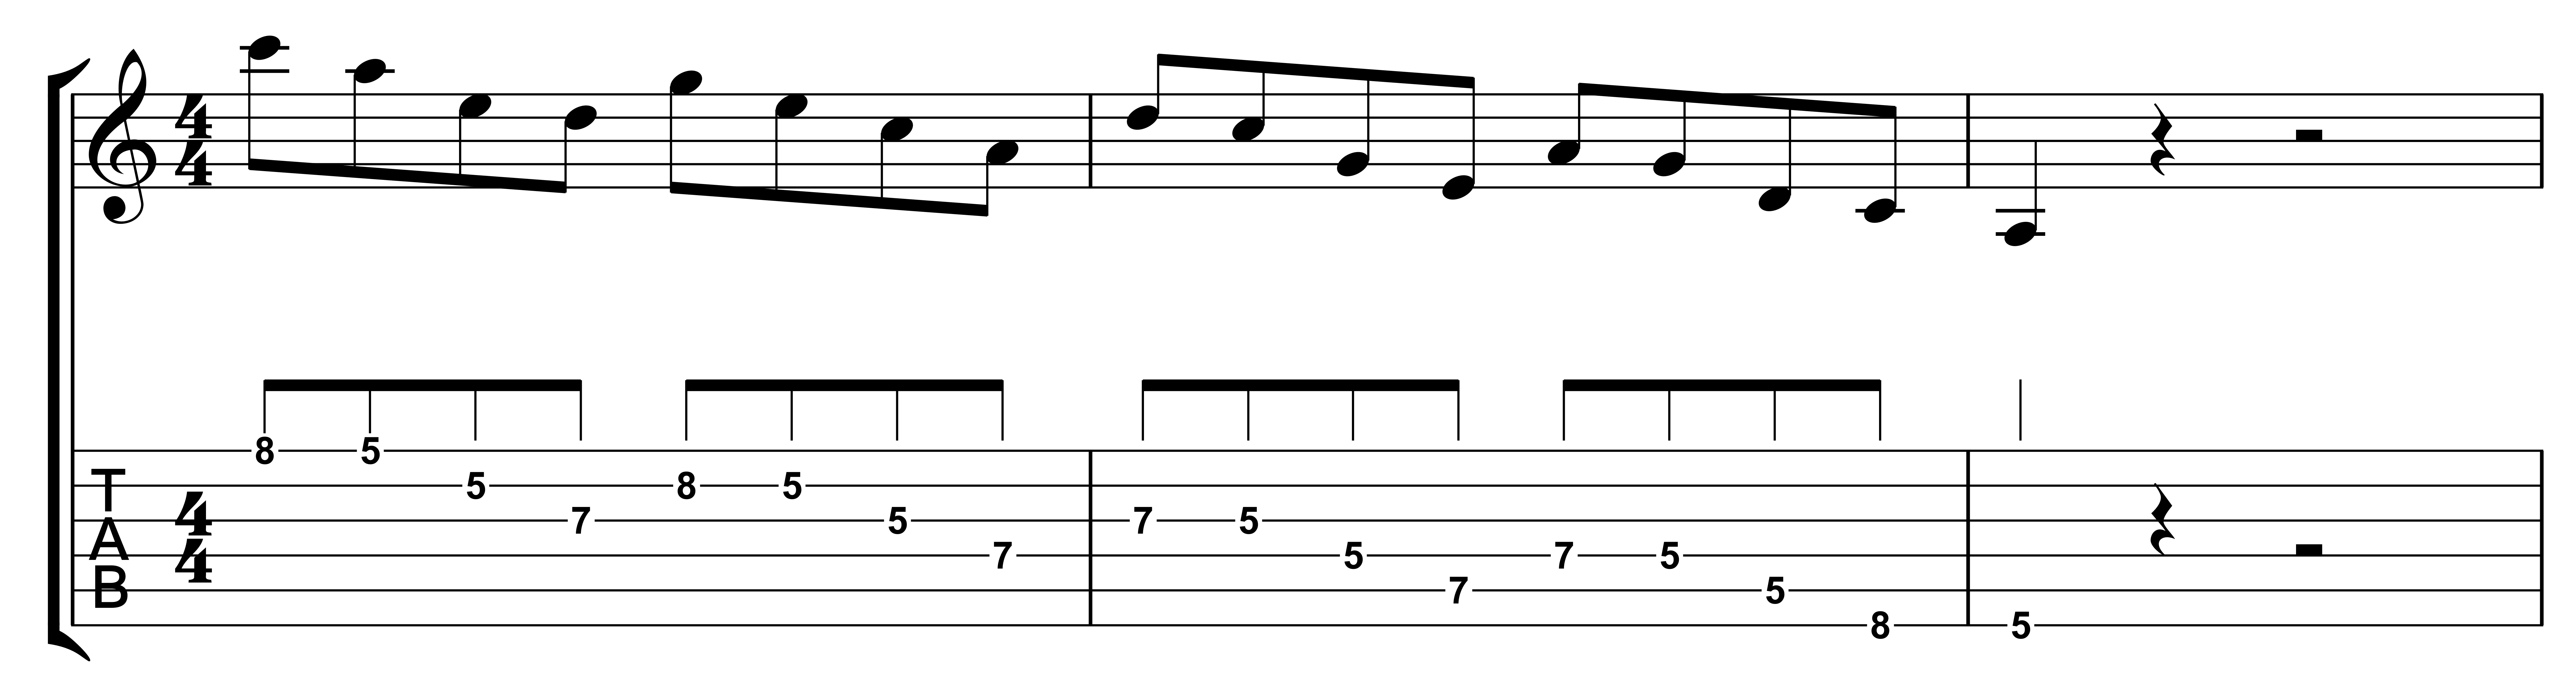 Pentatonic scale pattern in the key of A minor for guitar